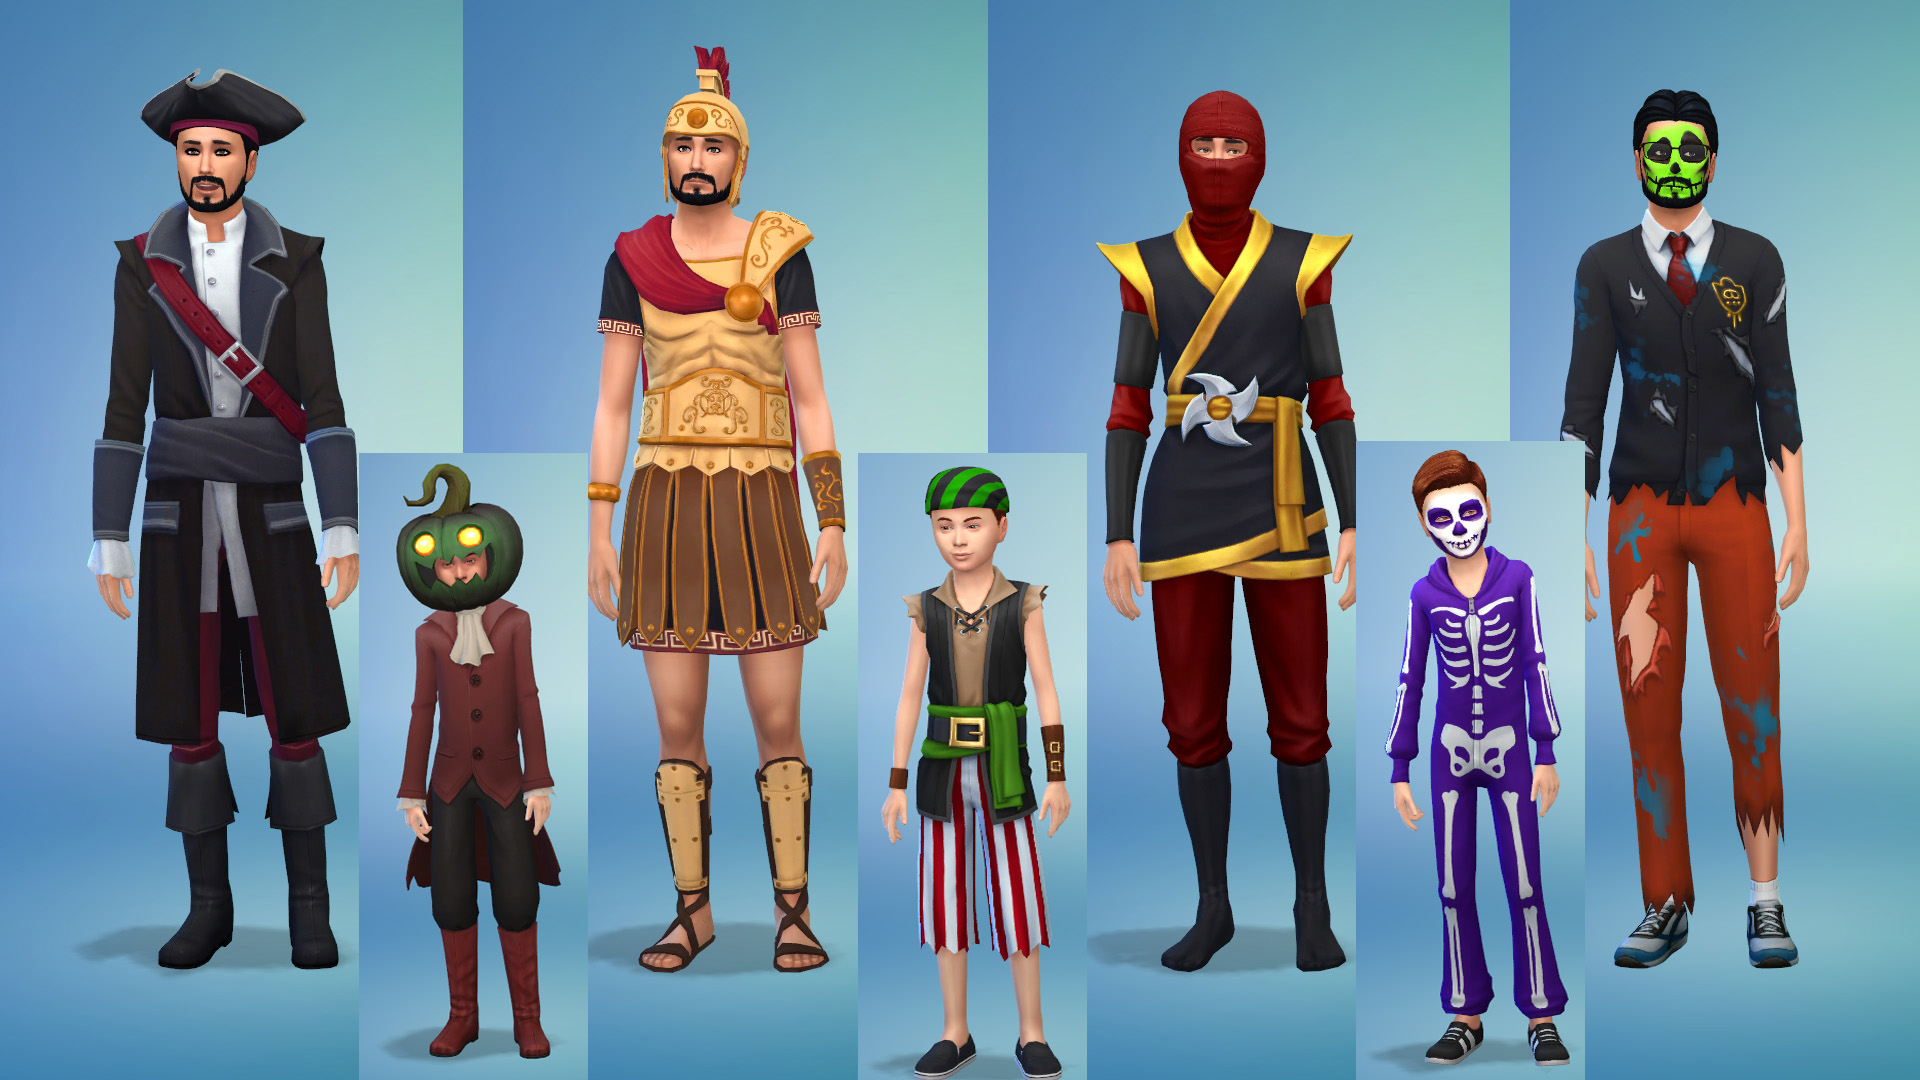 are there new hairstyles in the sims 4 spooky stuff